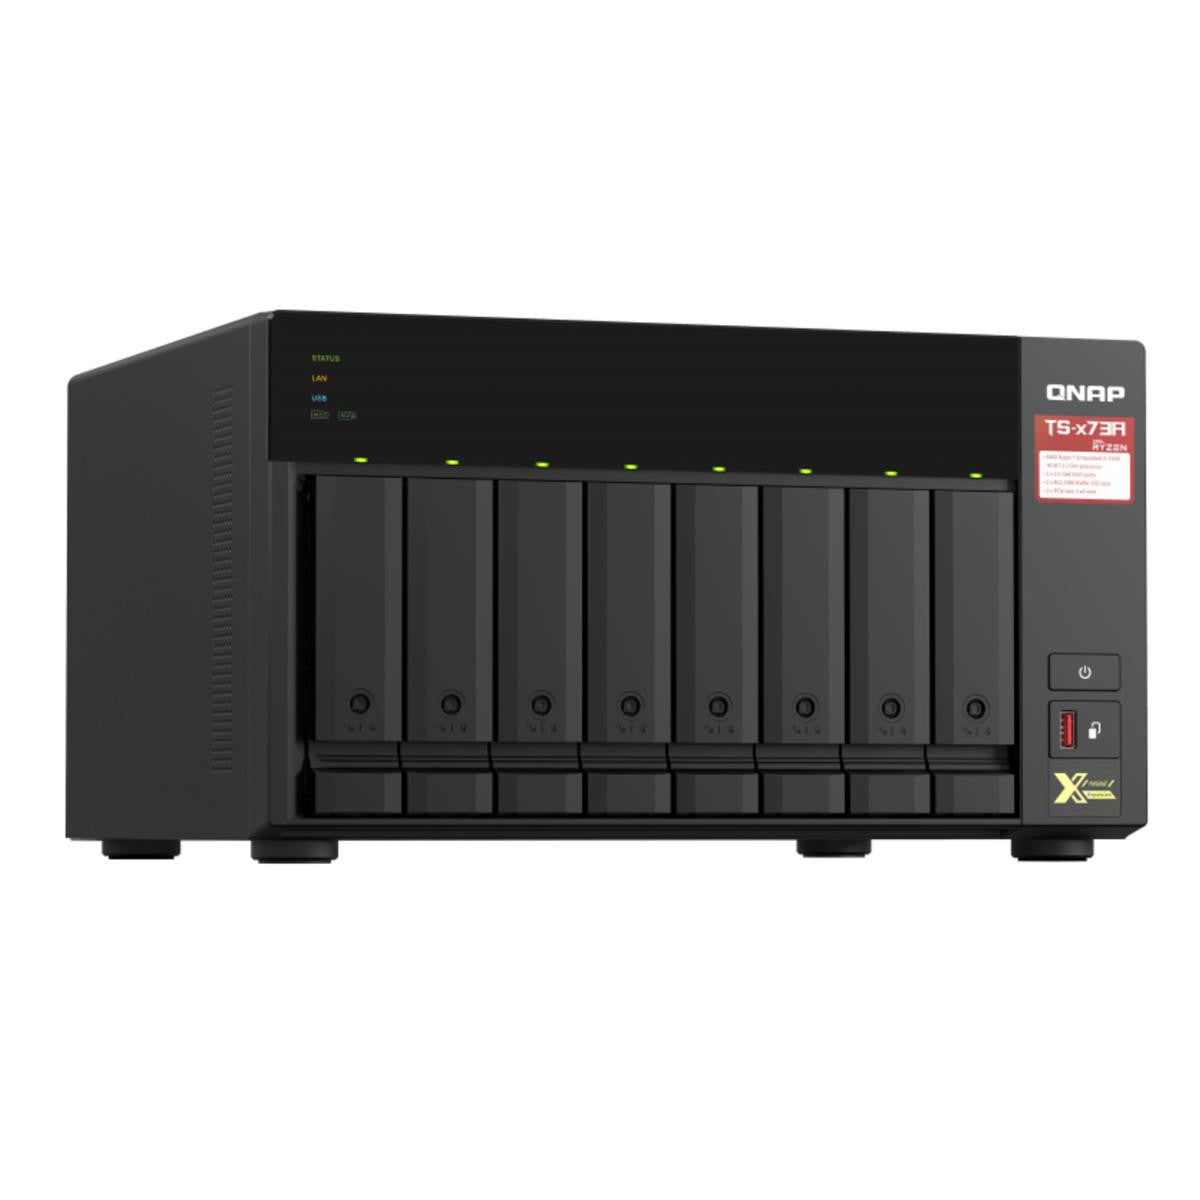 QNAP TS-873A 8-BAY NAS with 8GB DDR4 RAM and 80TB (8x10TB) Western Digital RED PLUS Drives Fully Assembled and Tested